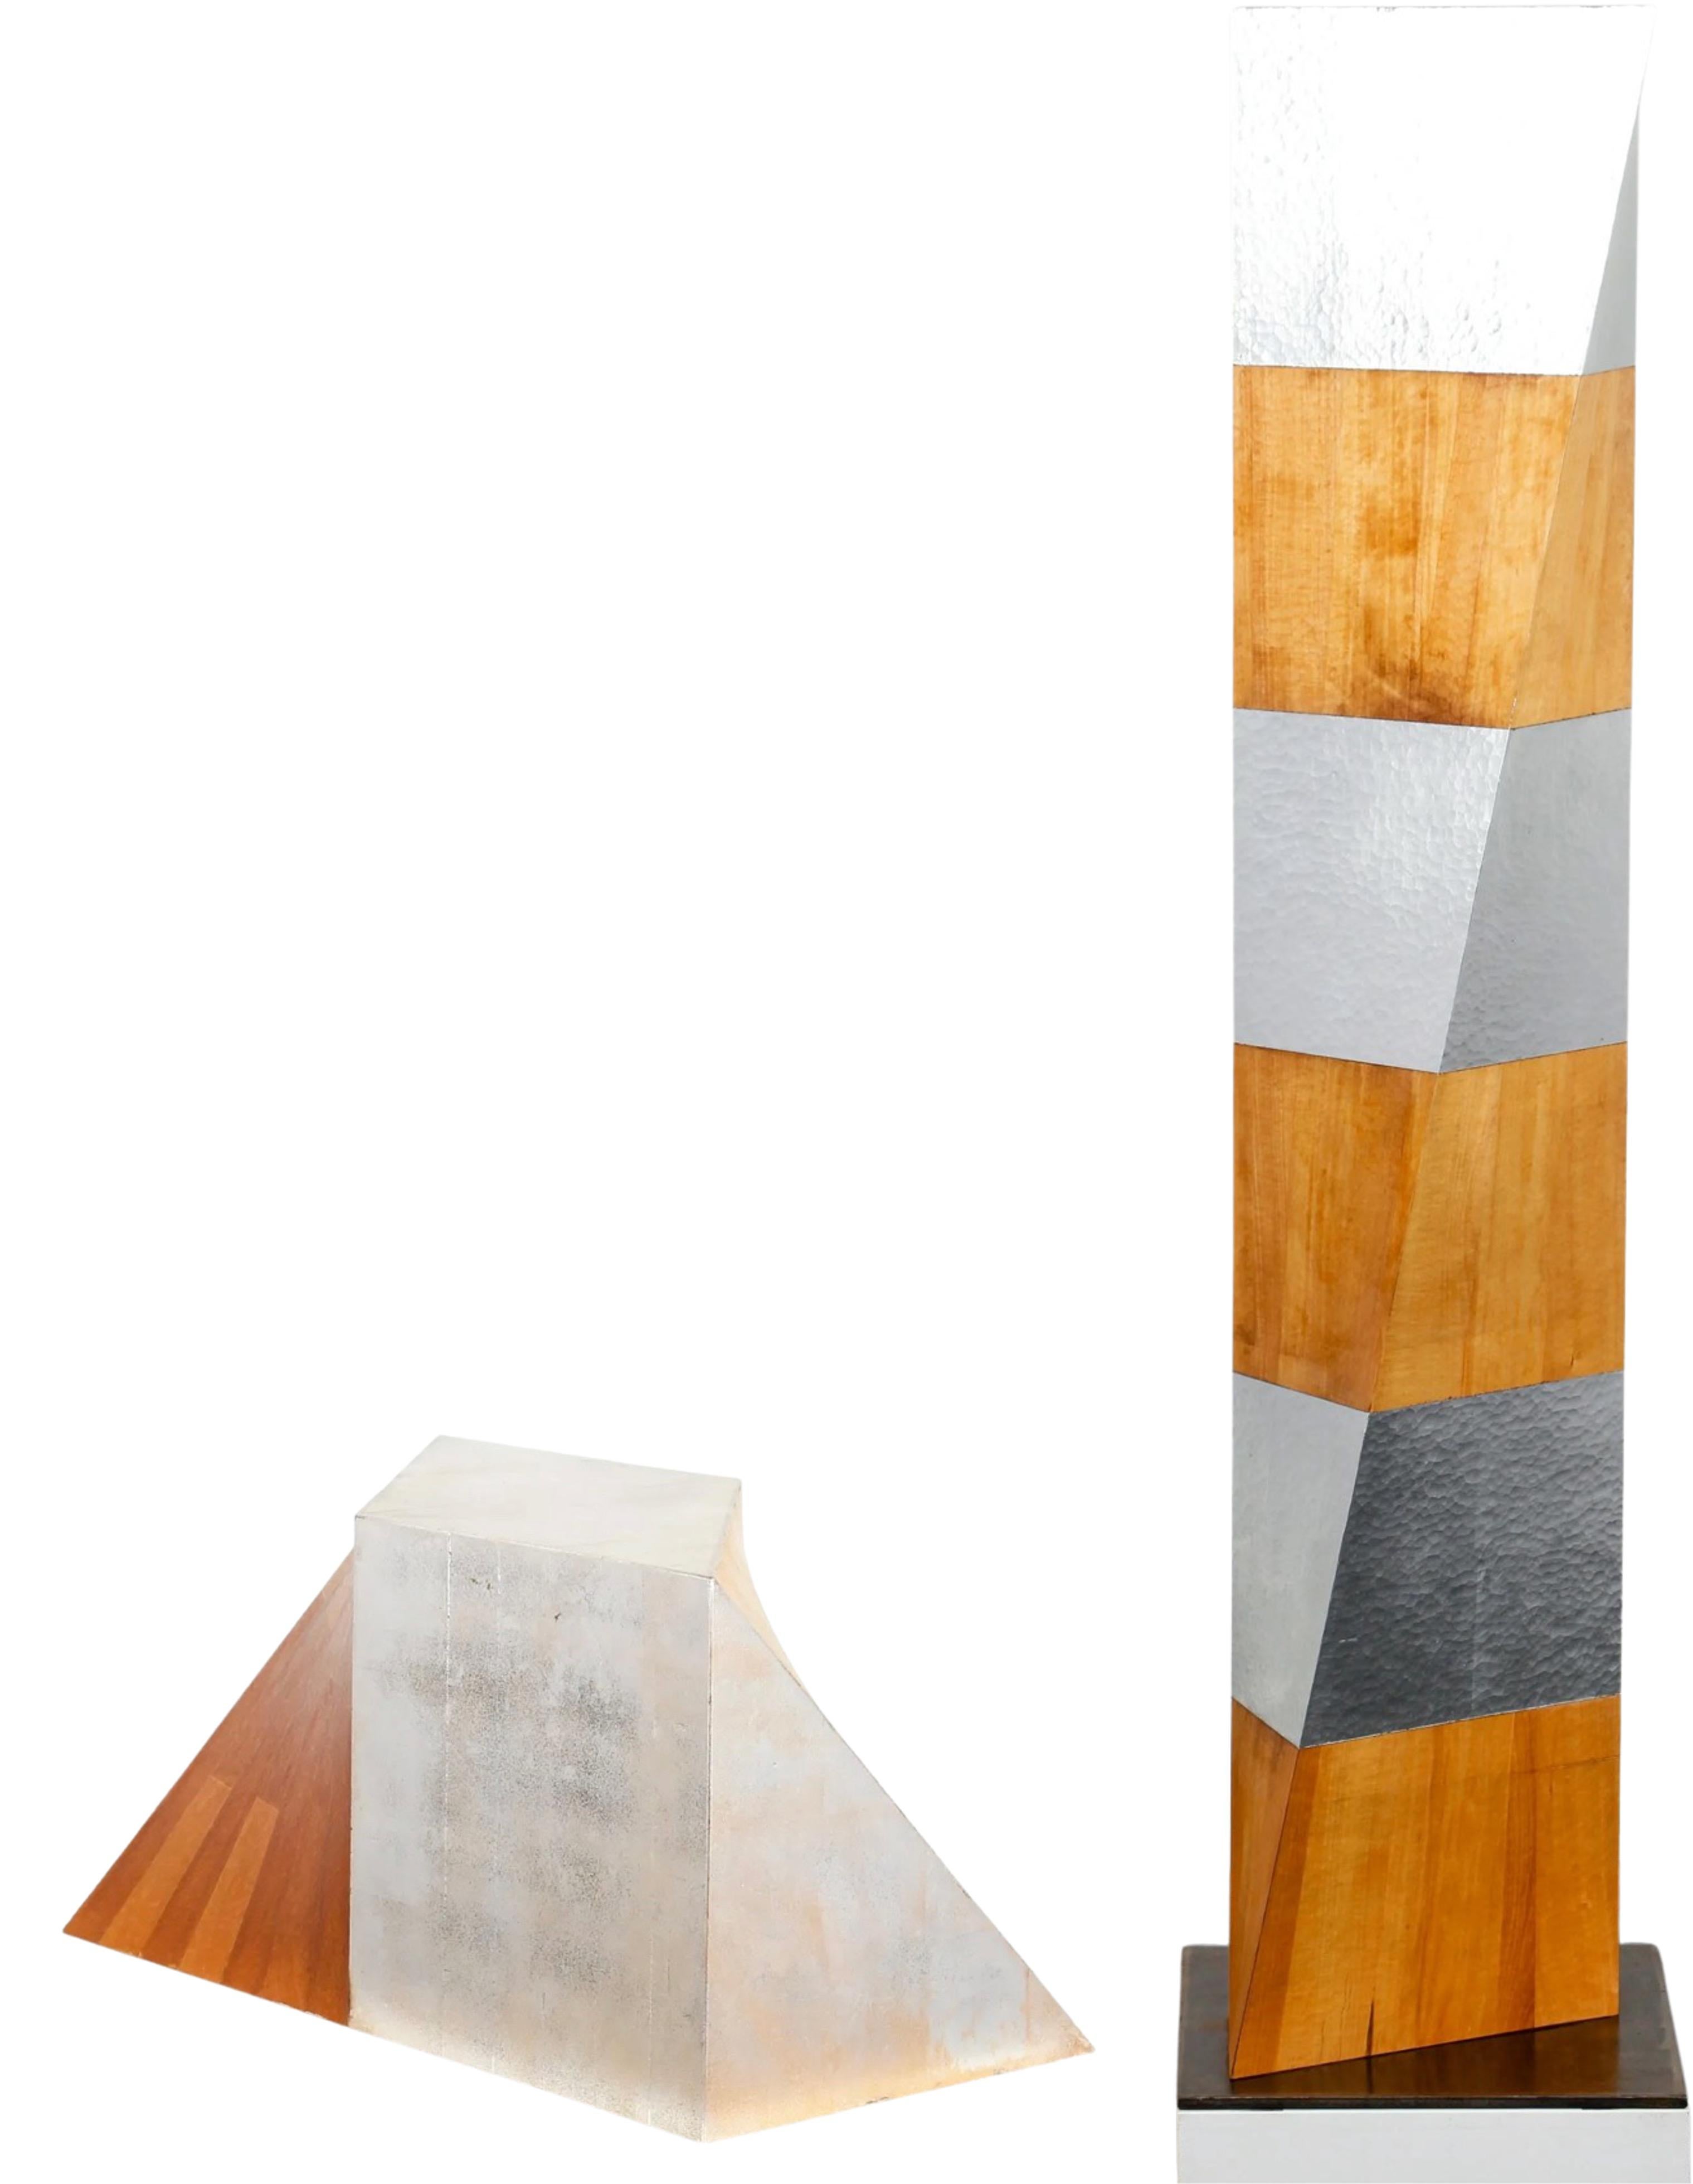 A two-piece sculpture by artist Kevin O'Toole. They are both made of solid maple wood and silver leaf. The tall includes the signature and title on the top edge. The short one includes the signature and title on the back edge. Both sculptures are